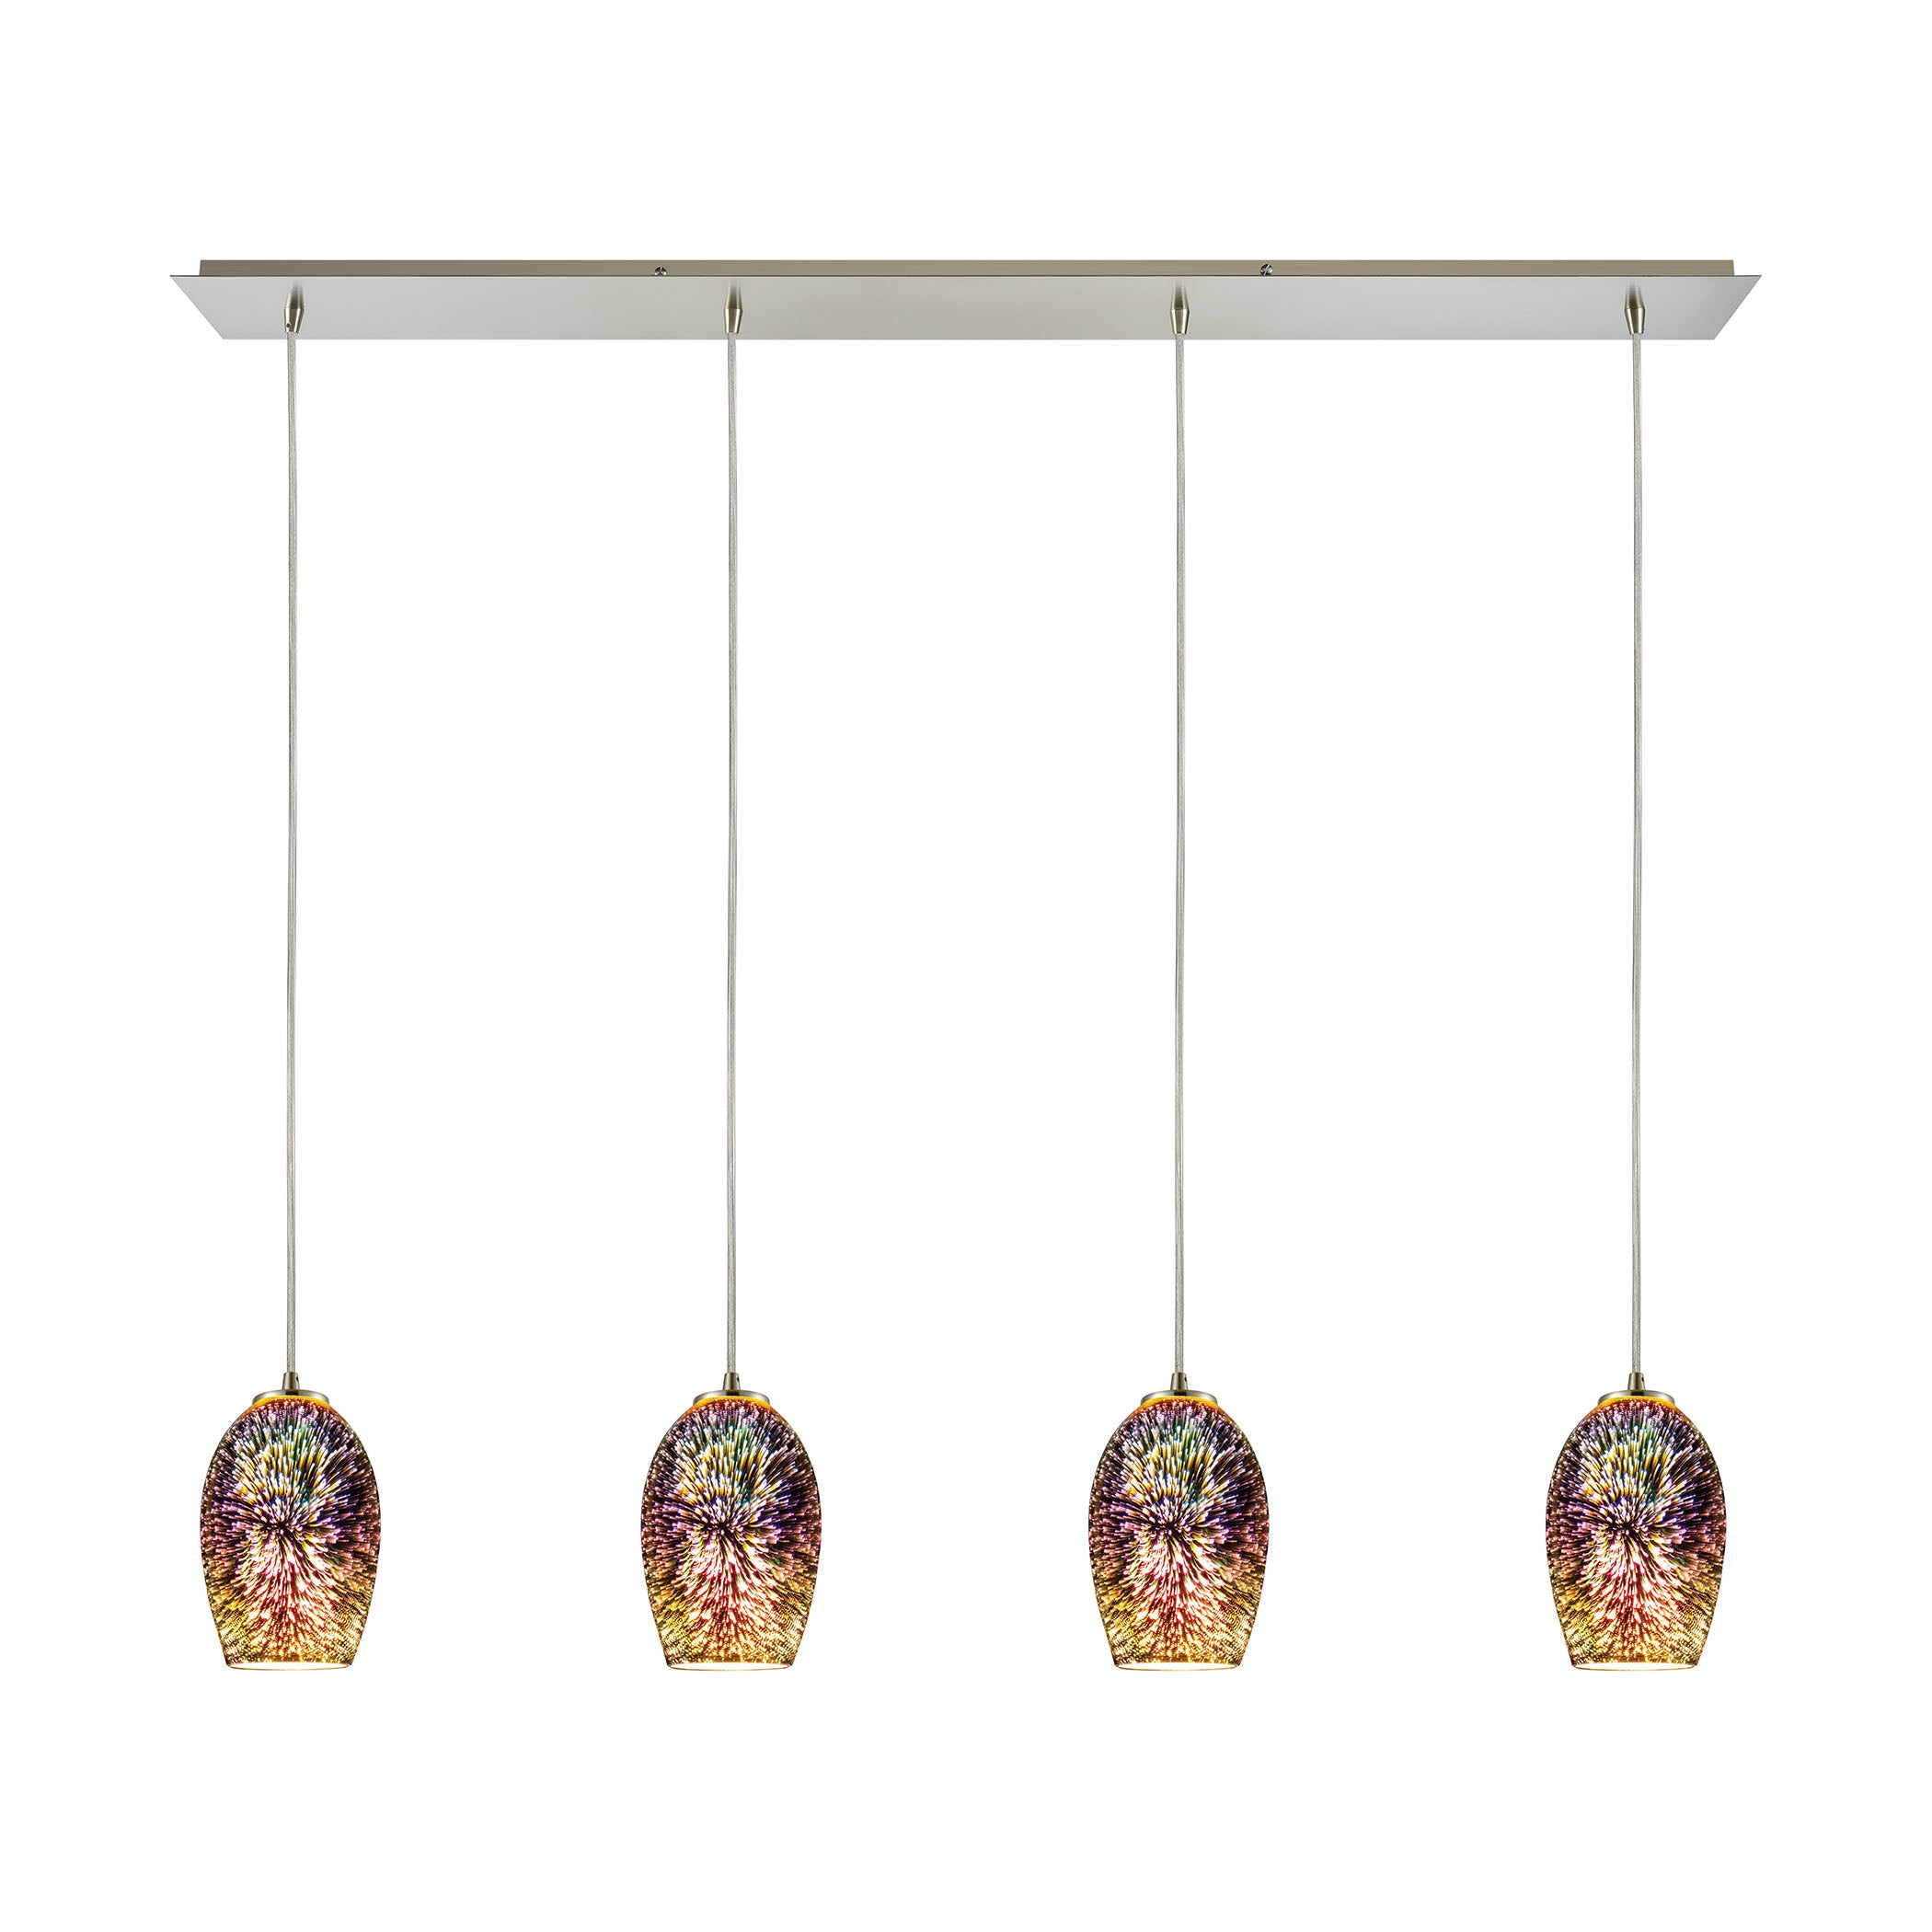 ELK Lighting 10506/4LP Illusions 4-Light Linear Pendant Fixture in Satin Nickel with Fireworks Glass